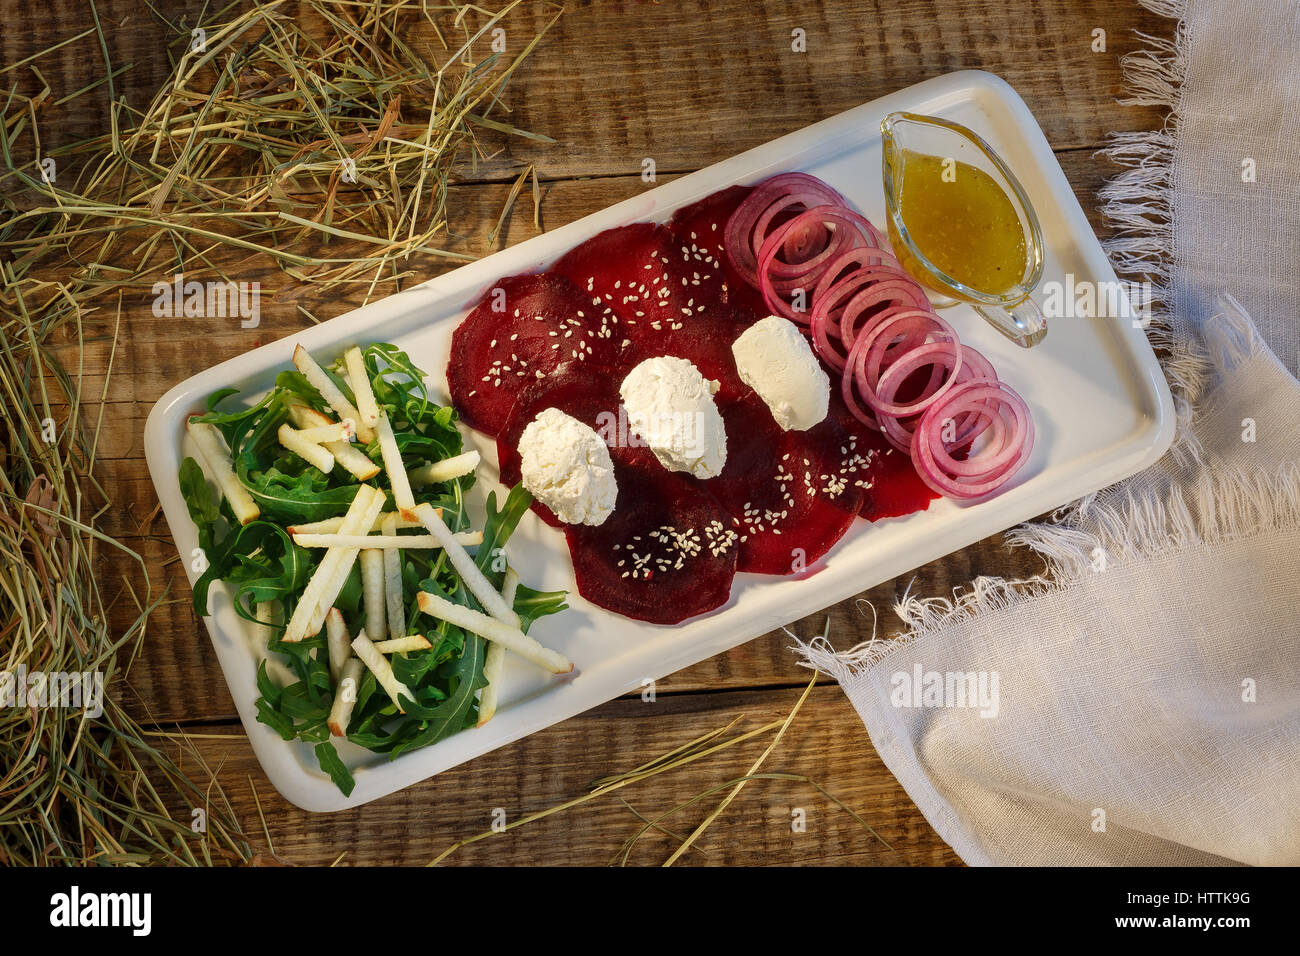 Red beet, greend, rings of onions with yellow cream and pastry, tastya white souce cream served on white plate standing on wooden table in exclusive f Stock Photo